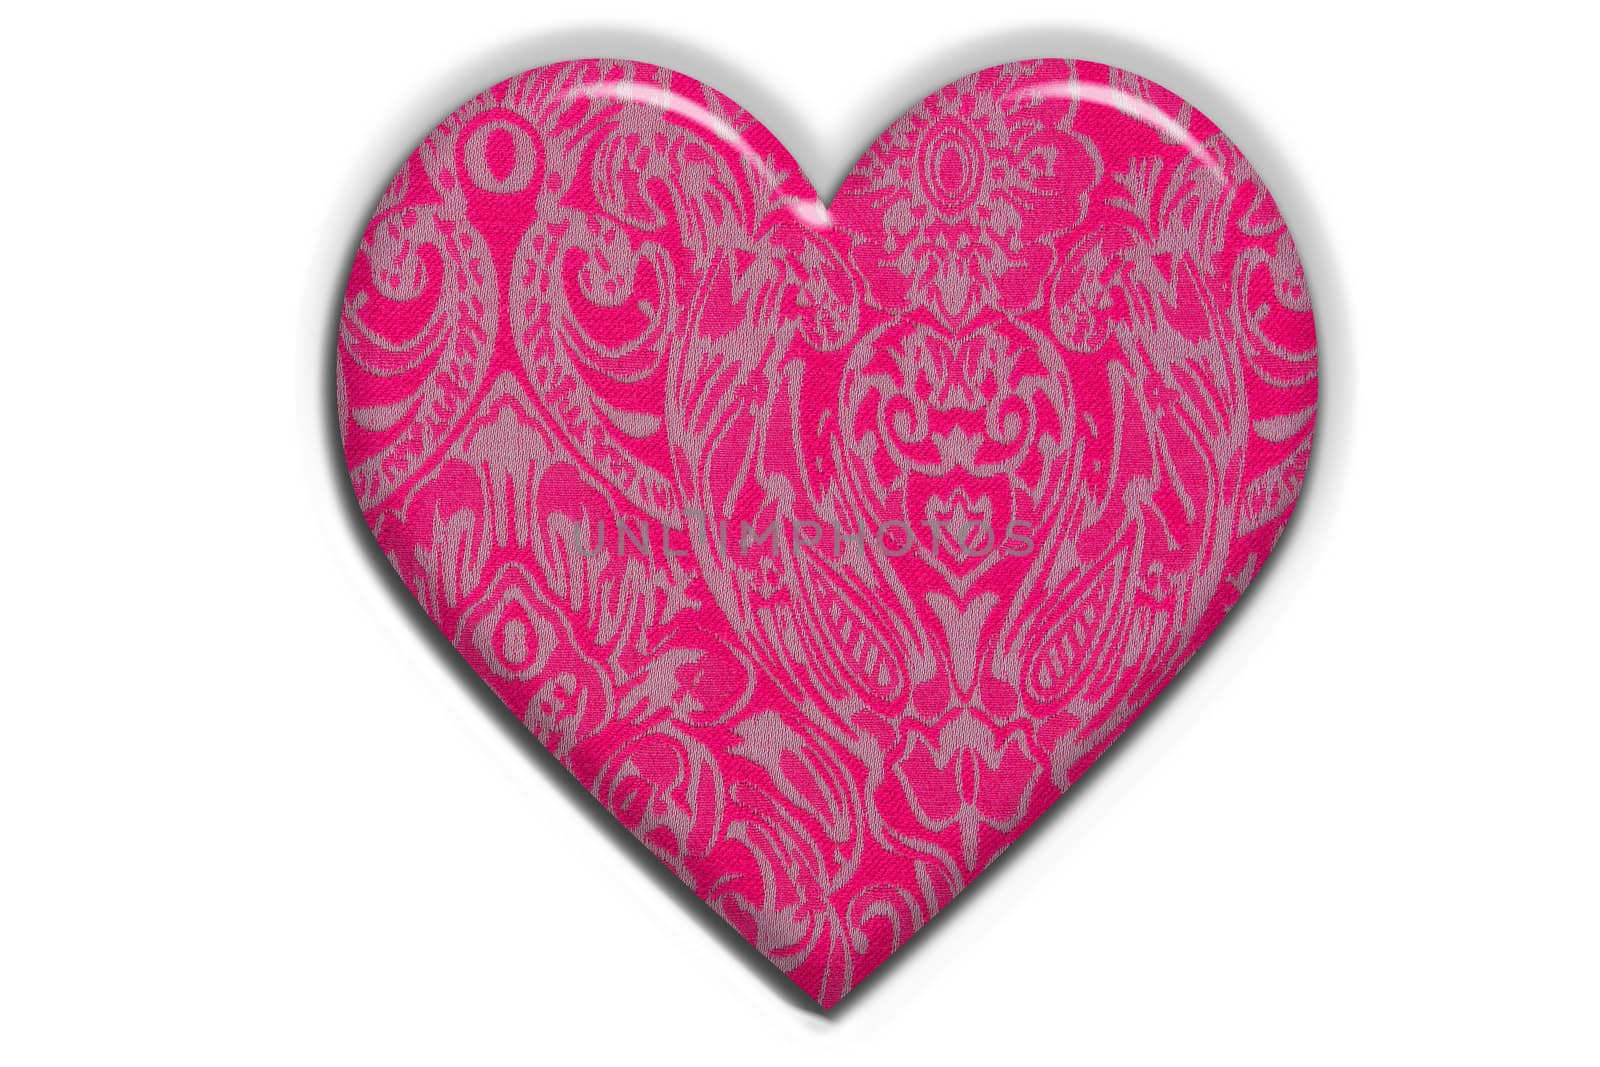 Heart in pink patterns on a white background